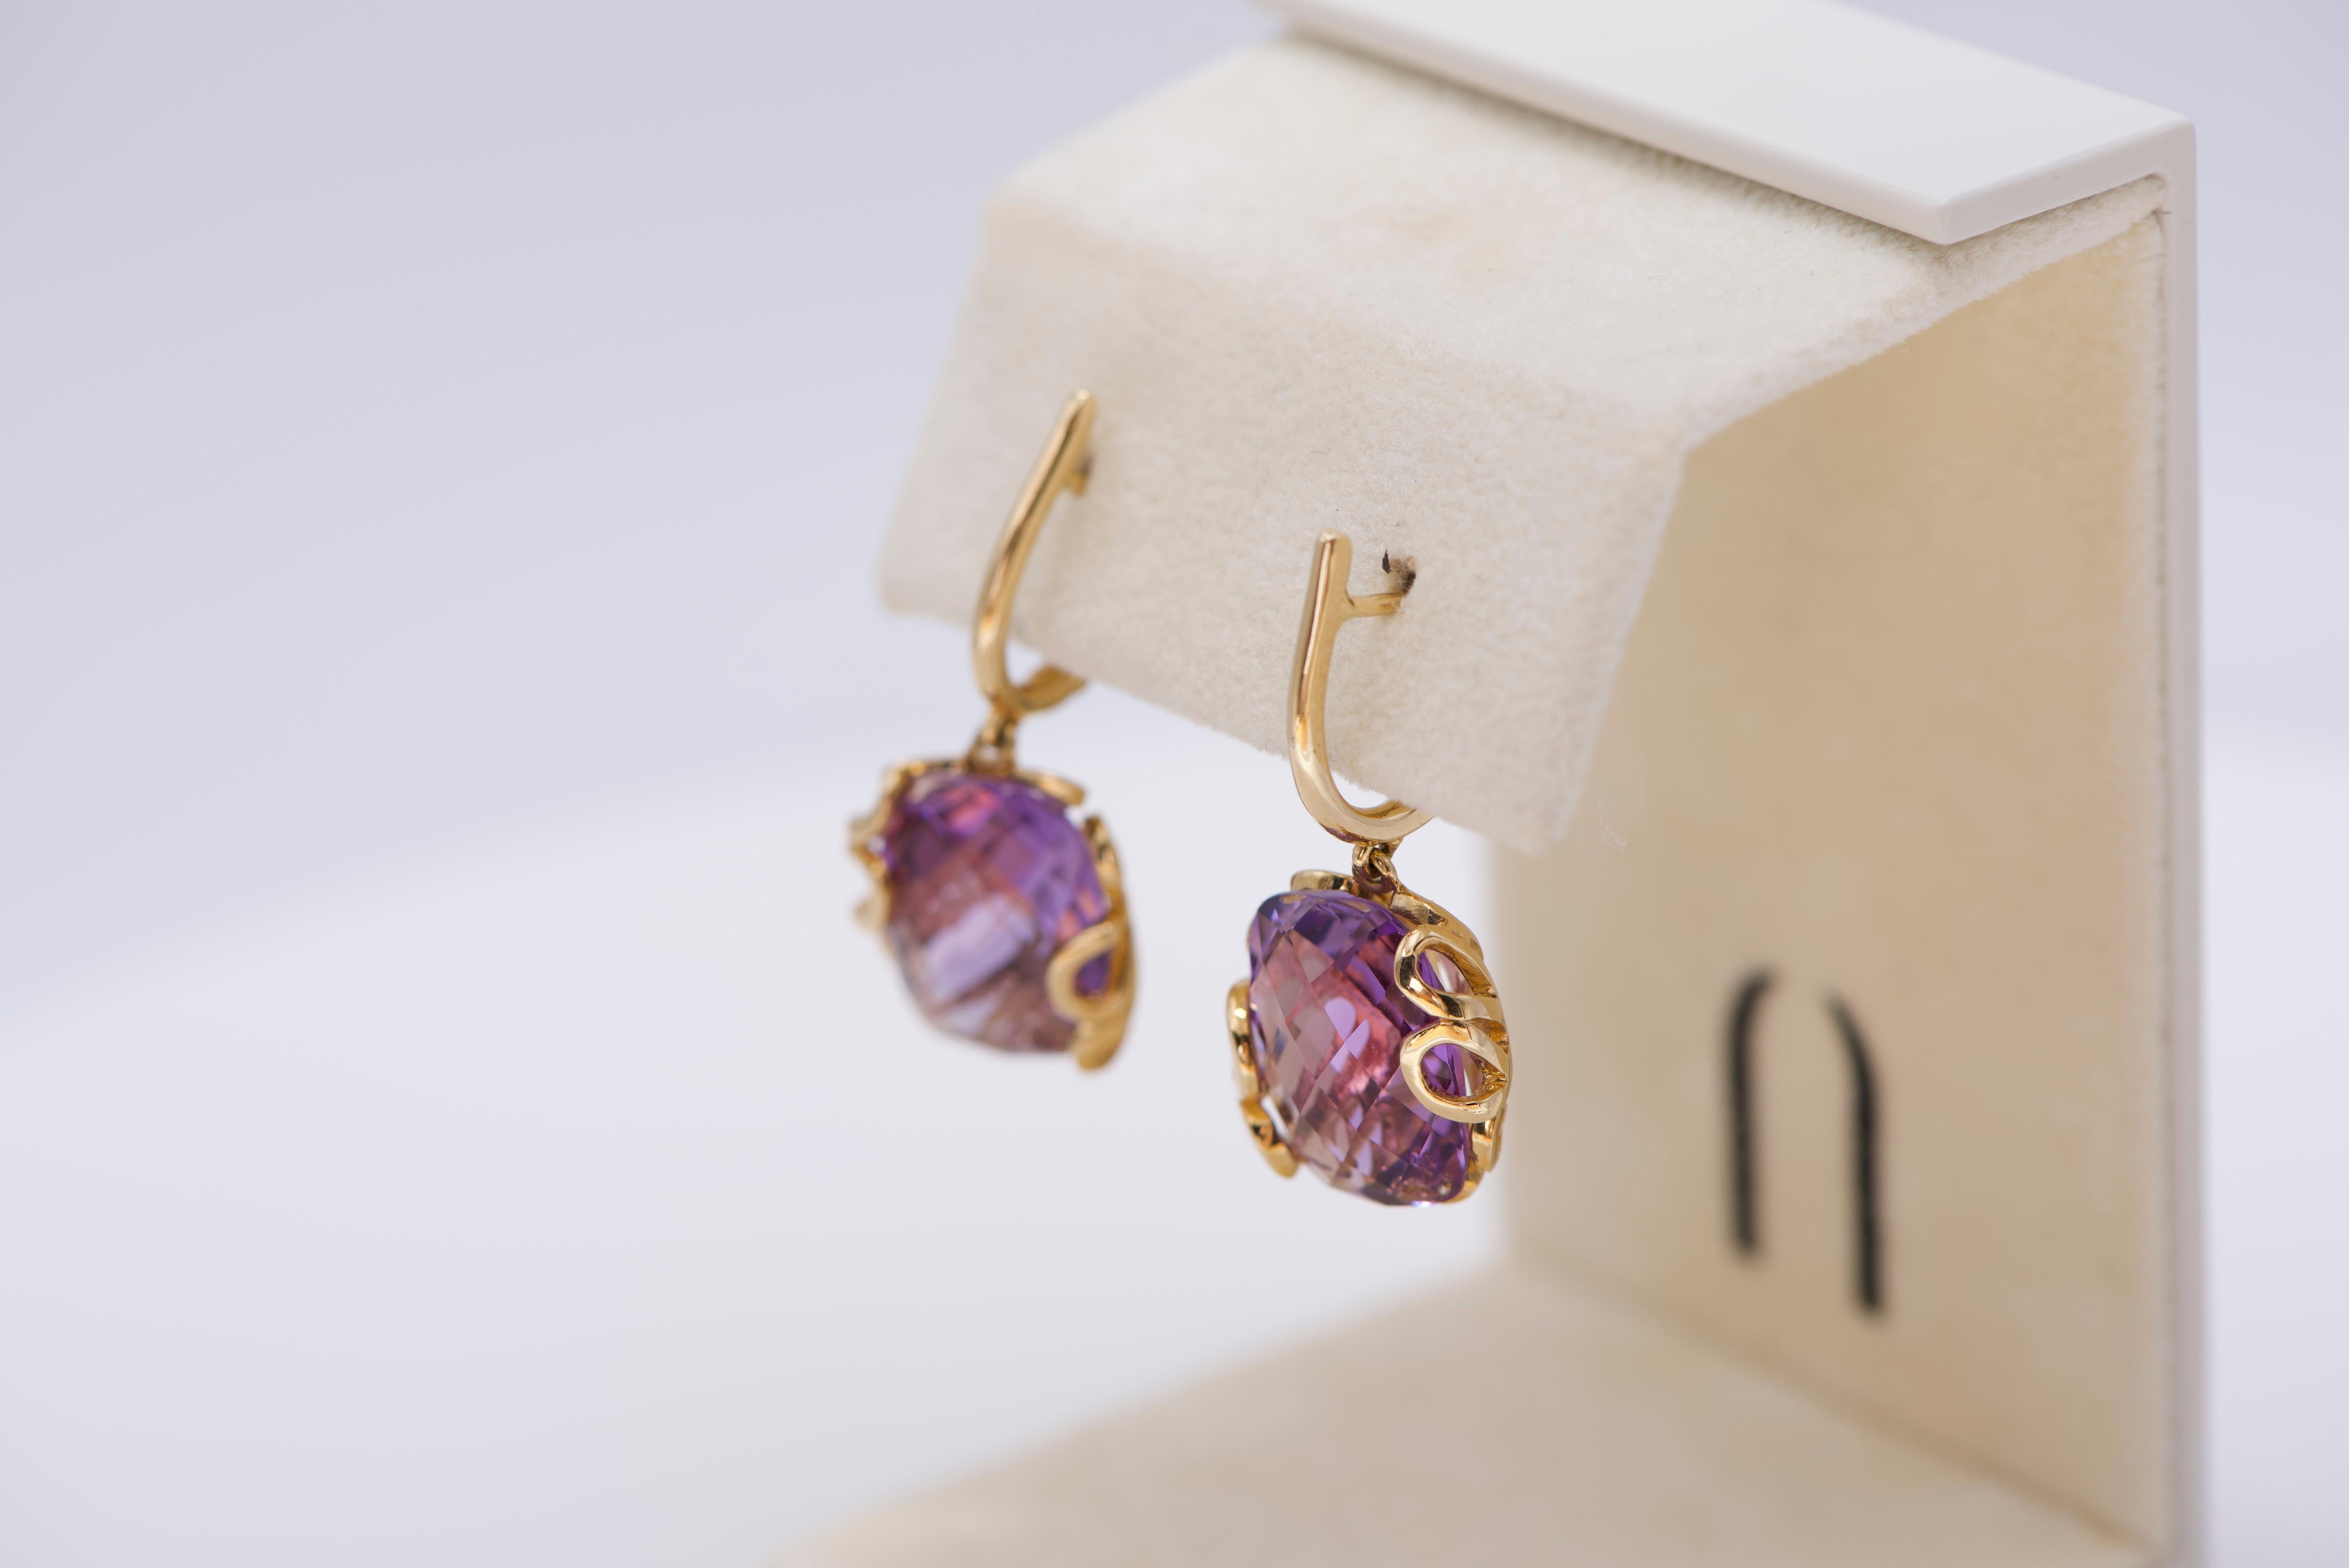 Earrings in 18K yellow gold (approx. 7.00 grams) with amethyst (approx. 2.80 carats) drop from Miseno's Foglia di Mare, or Sea Leaf, collection. 